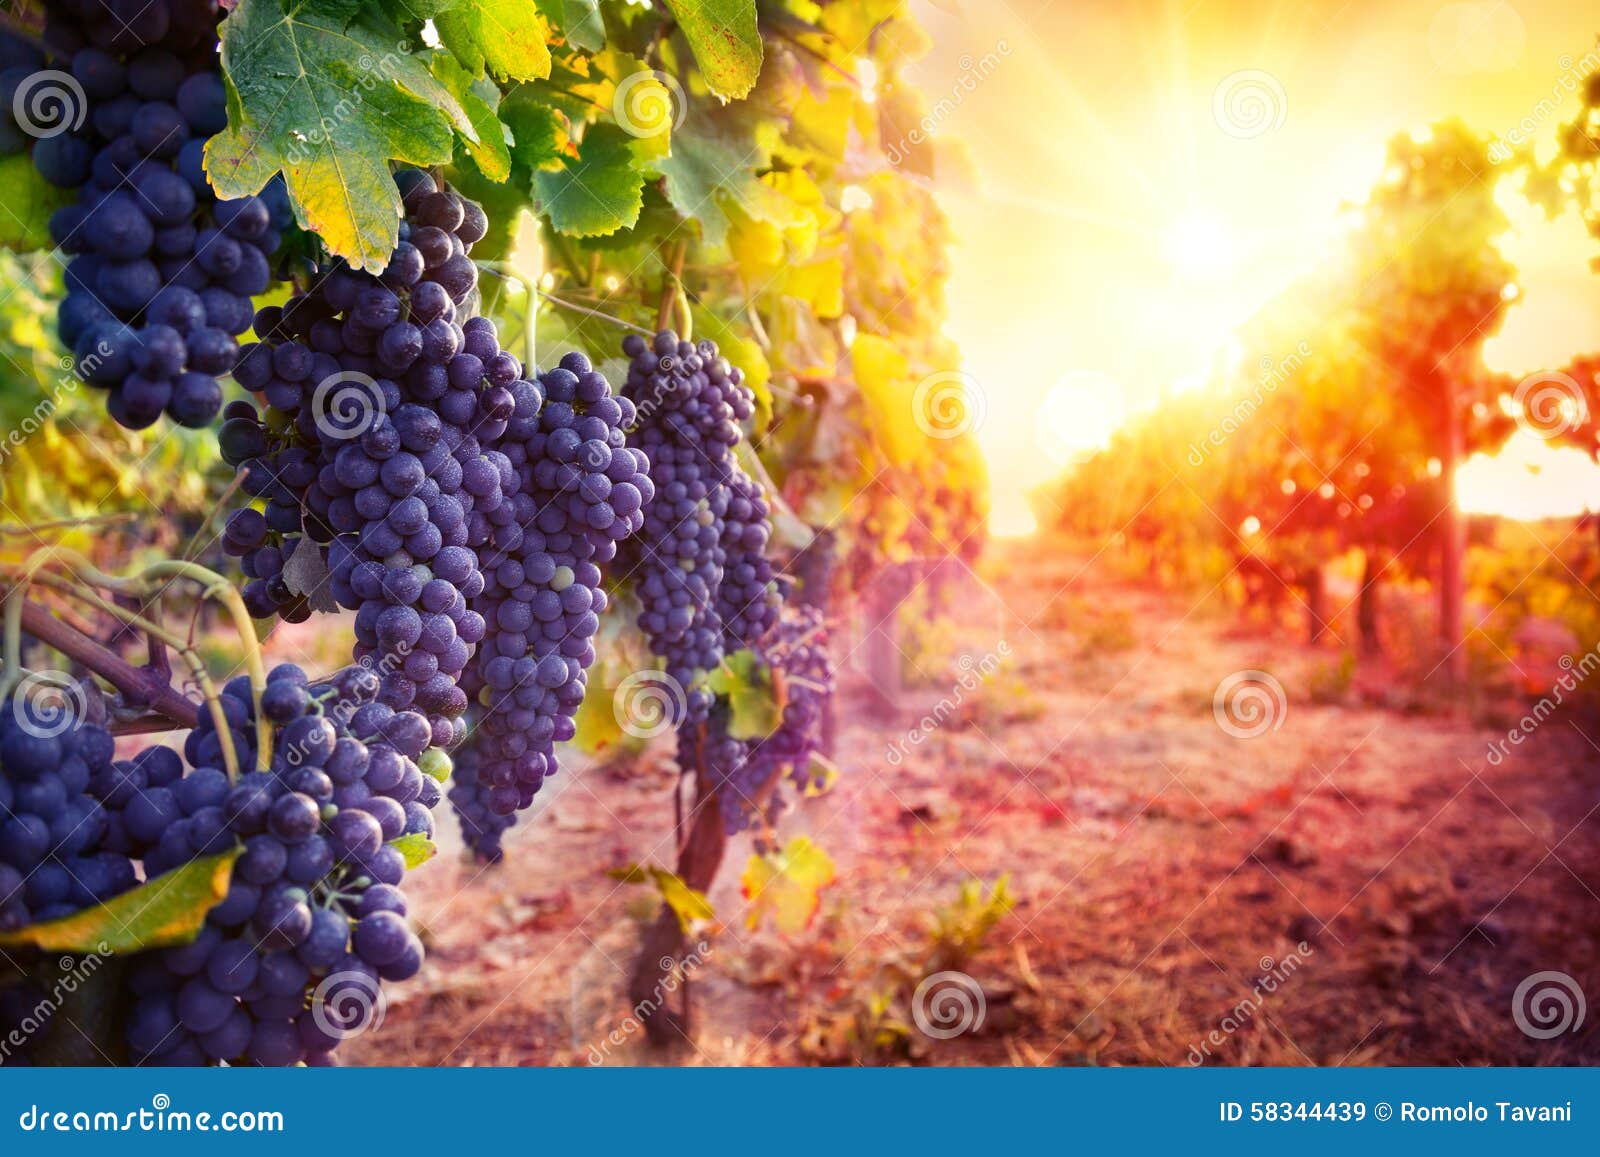 vineyard with ripe grapes in countryside